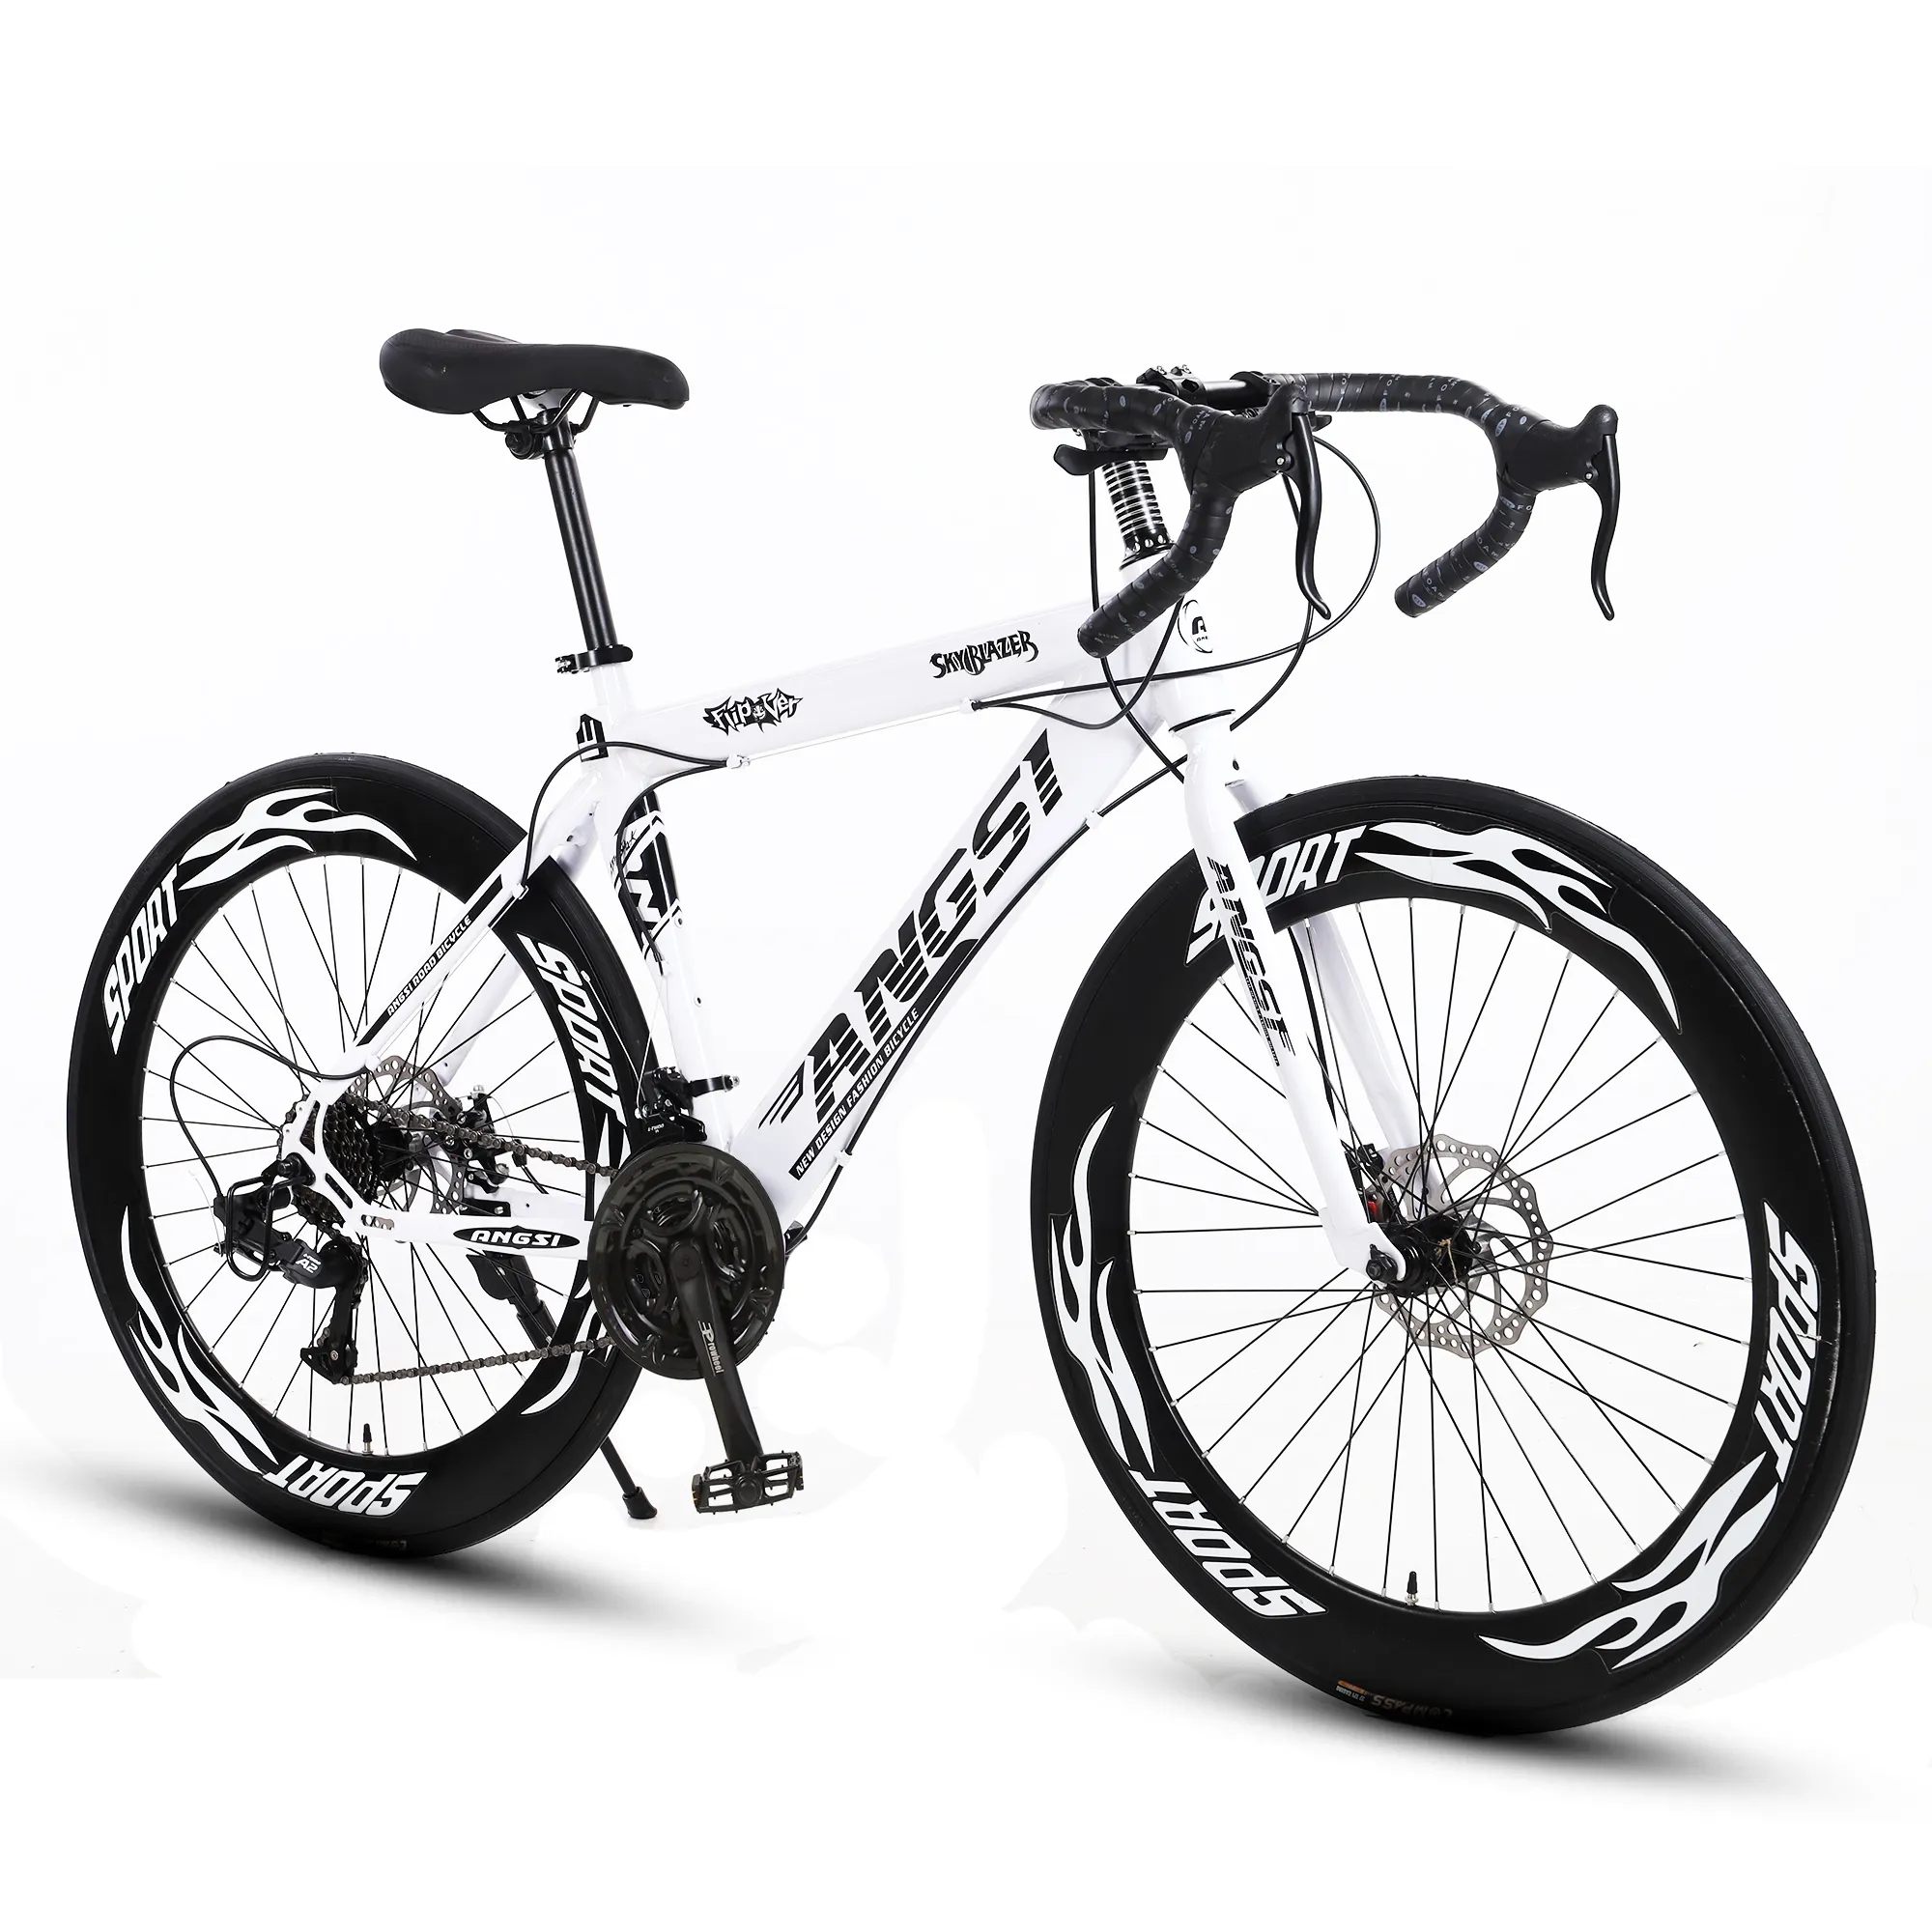 Factory direct sale road bike high quality carbon roadbike 700c race bicycle 21 speed